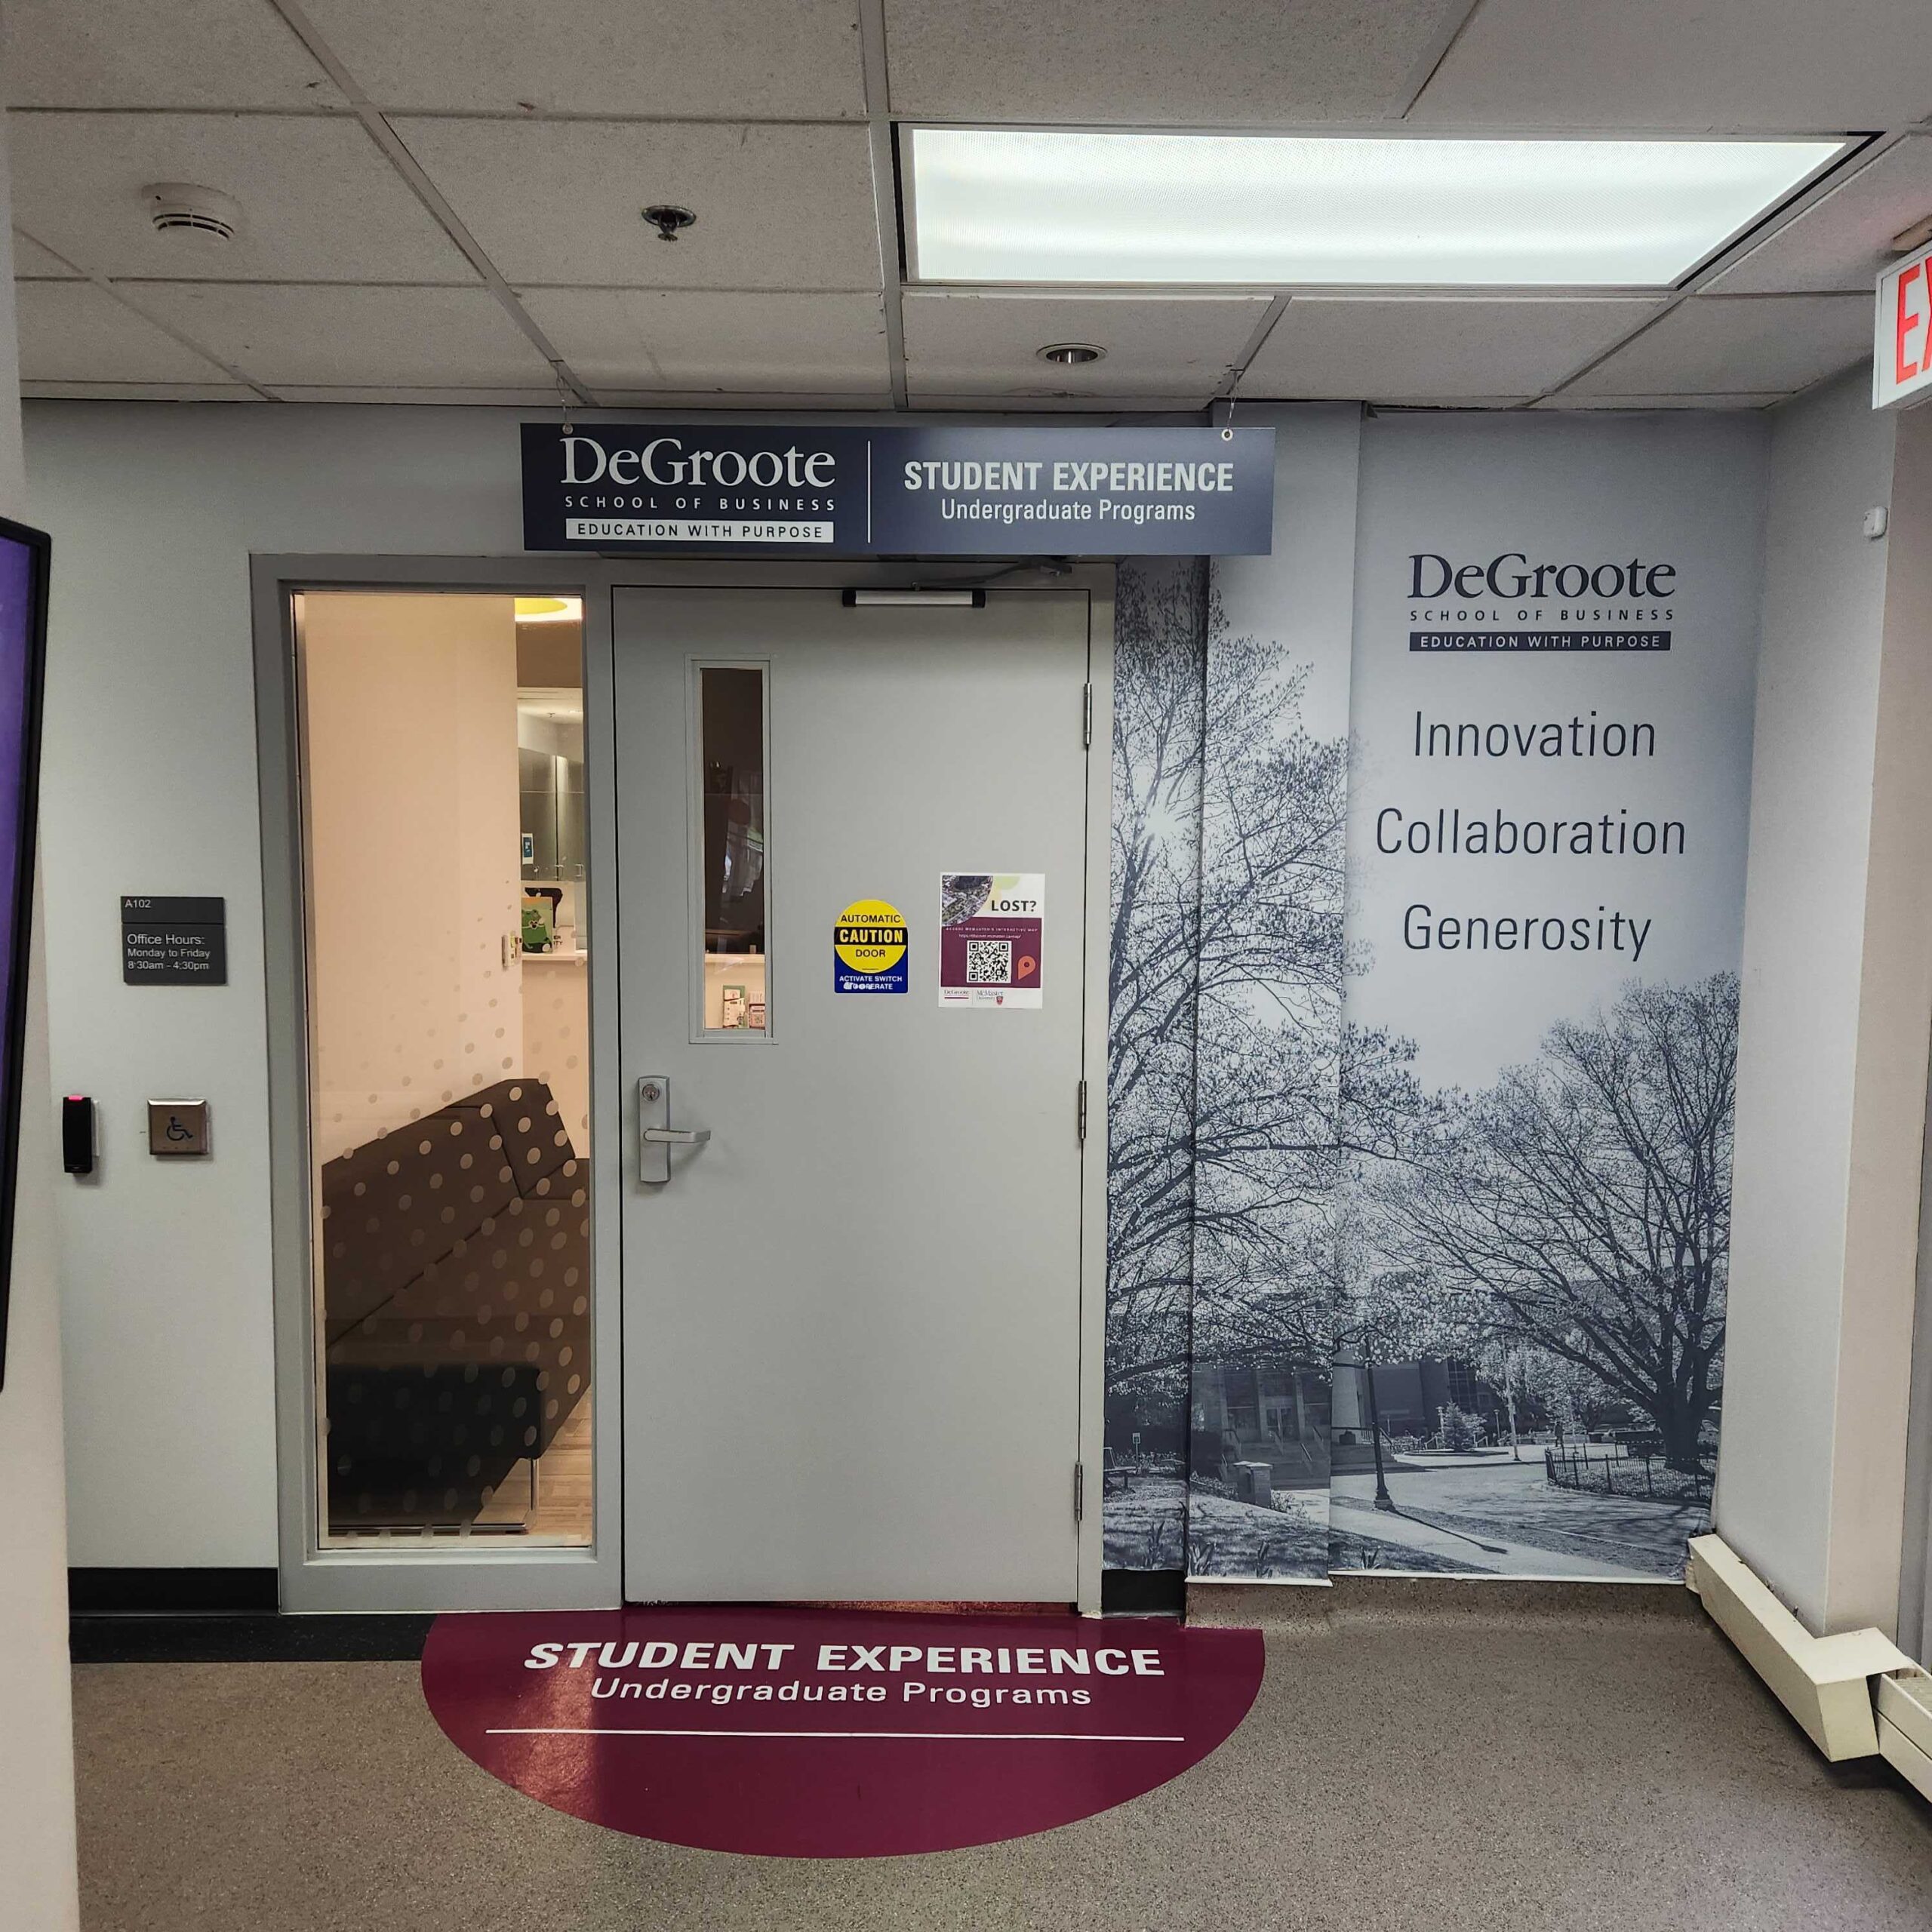 Undergraduate-Student-Experience-Office. This is what the front door entrance of the SE office looks like. Located at DeGroote School of Business building on the main McMaster University Campus.